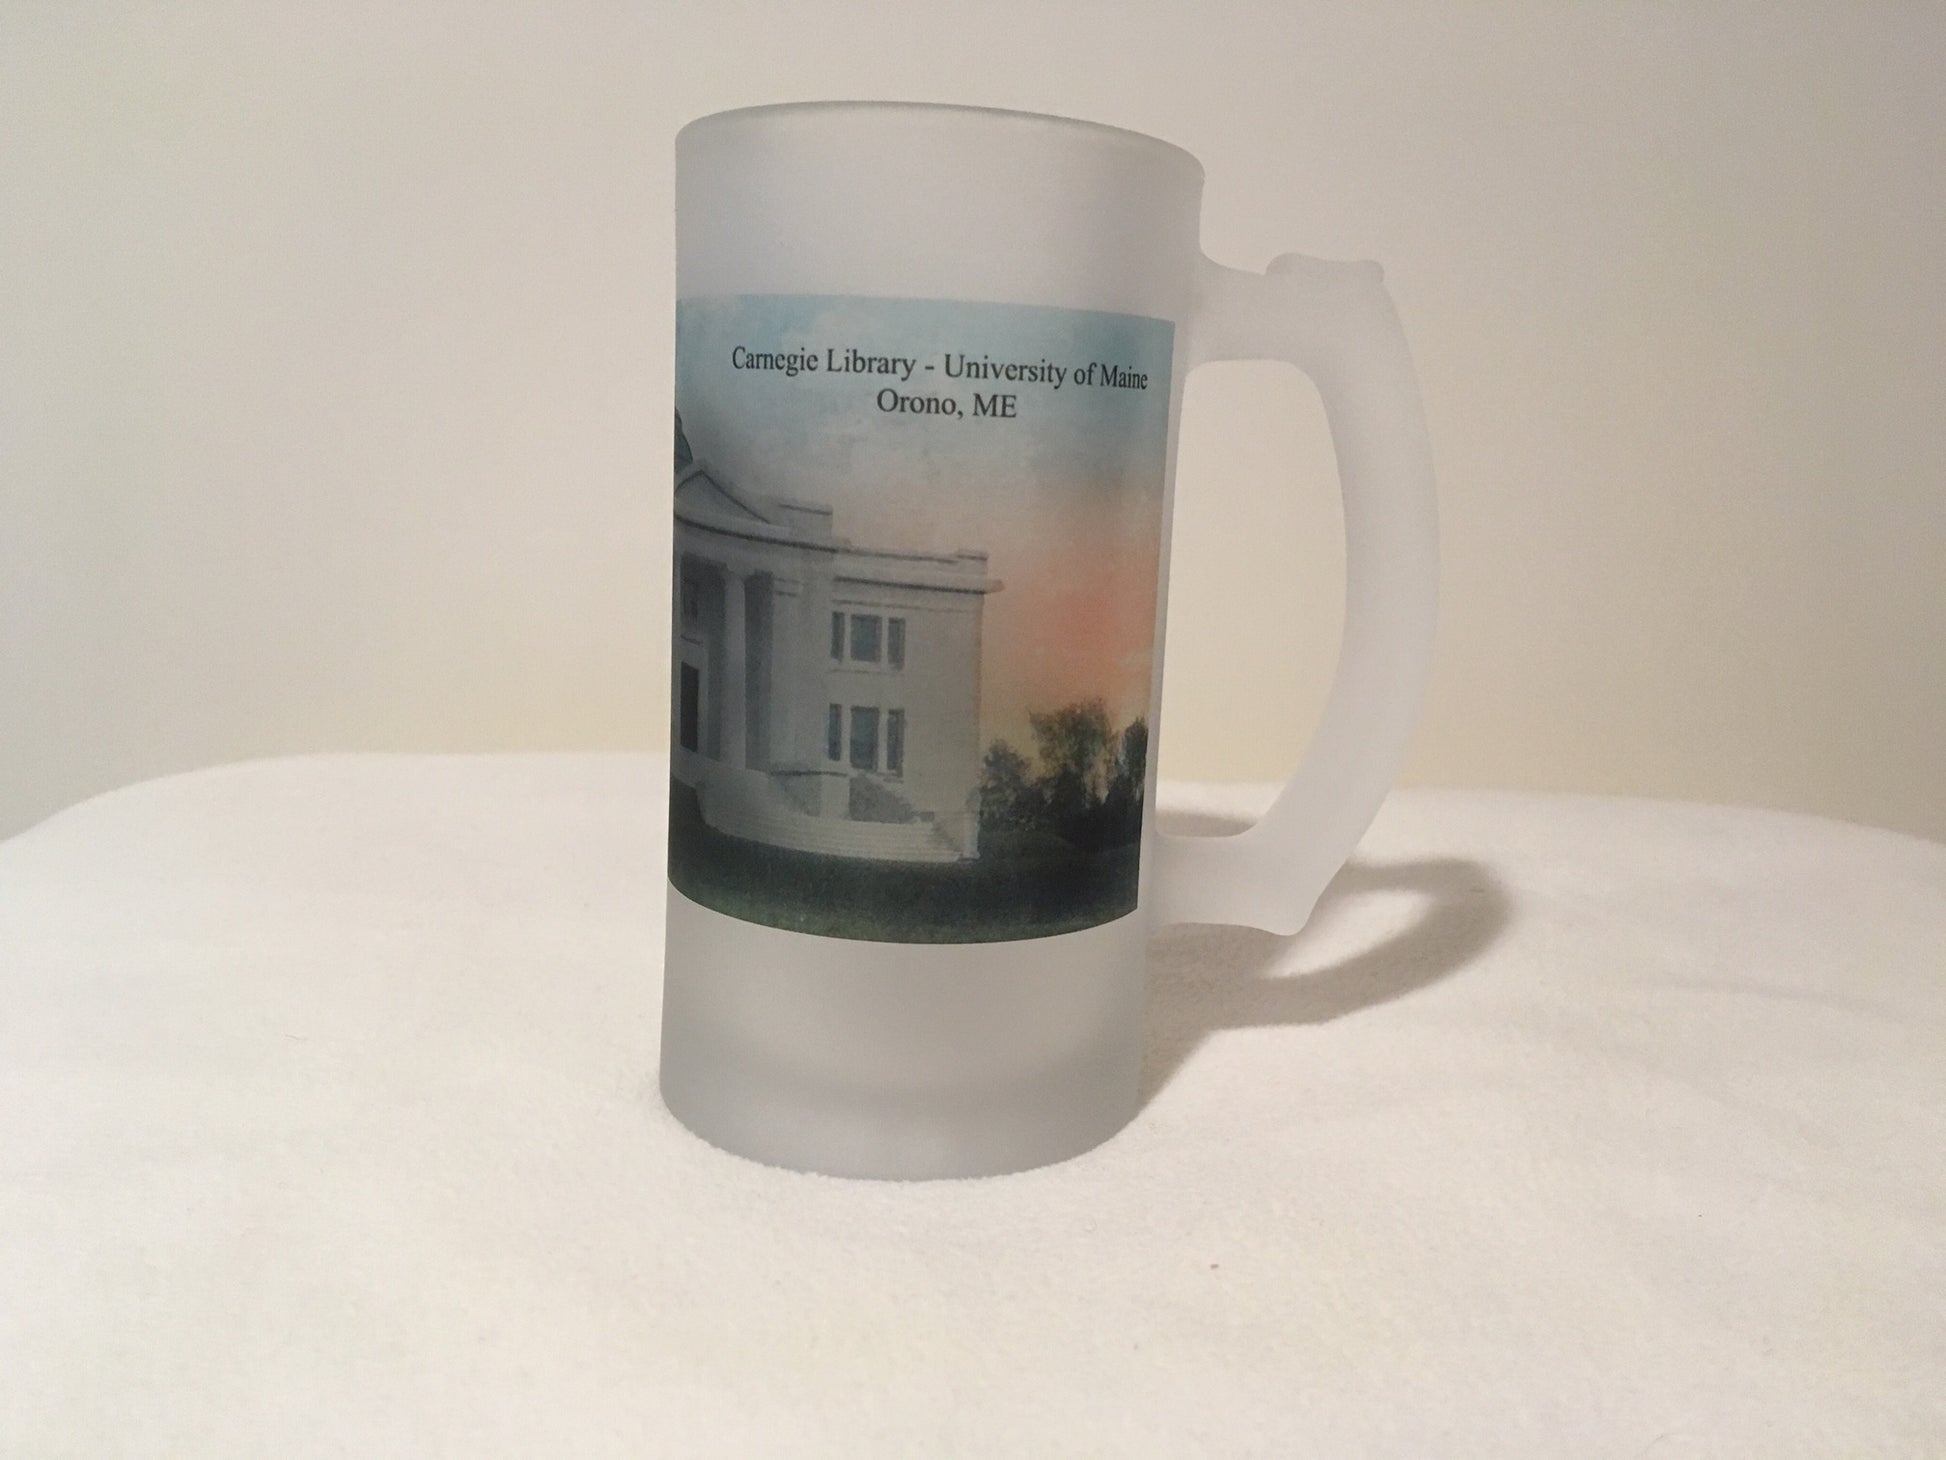 Colorful Frosted Glass Beer Mug of Carnegie Library at UMaine - Orono. - That Fabled Shore Home Decor